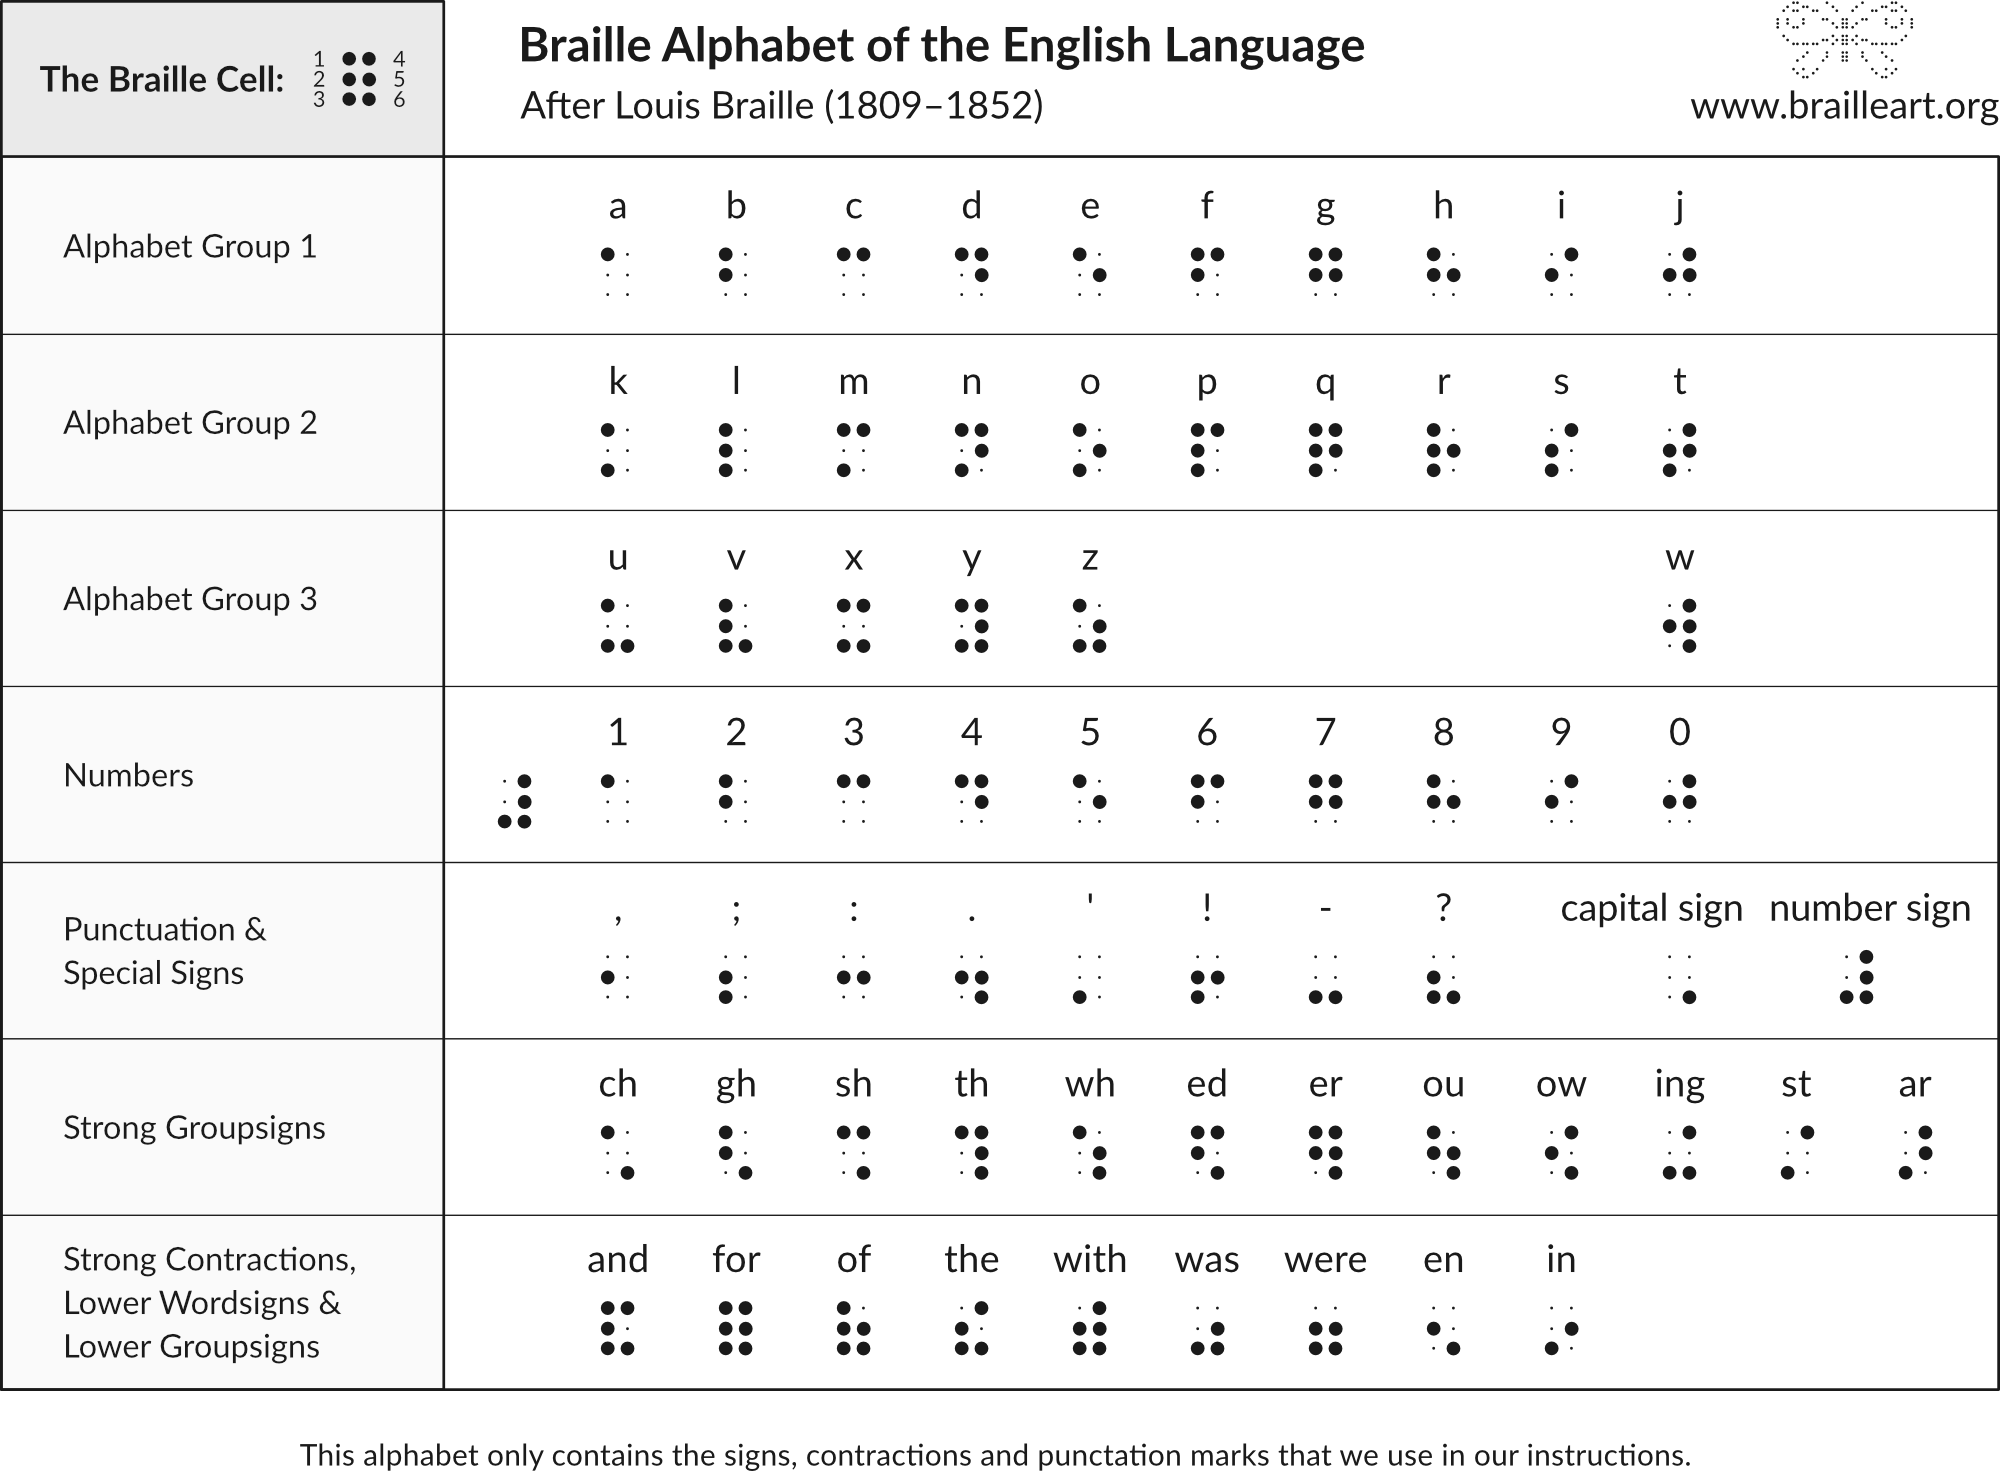 Braille alphabet of the English Language after Louis Braille